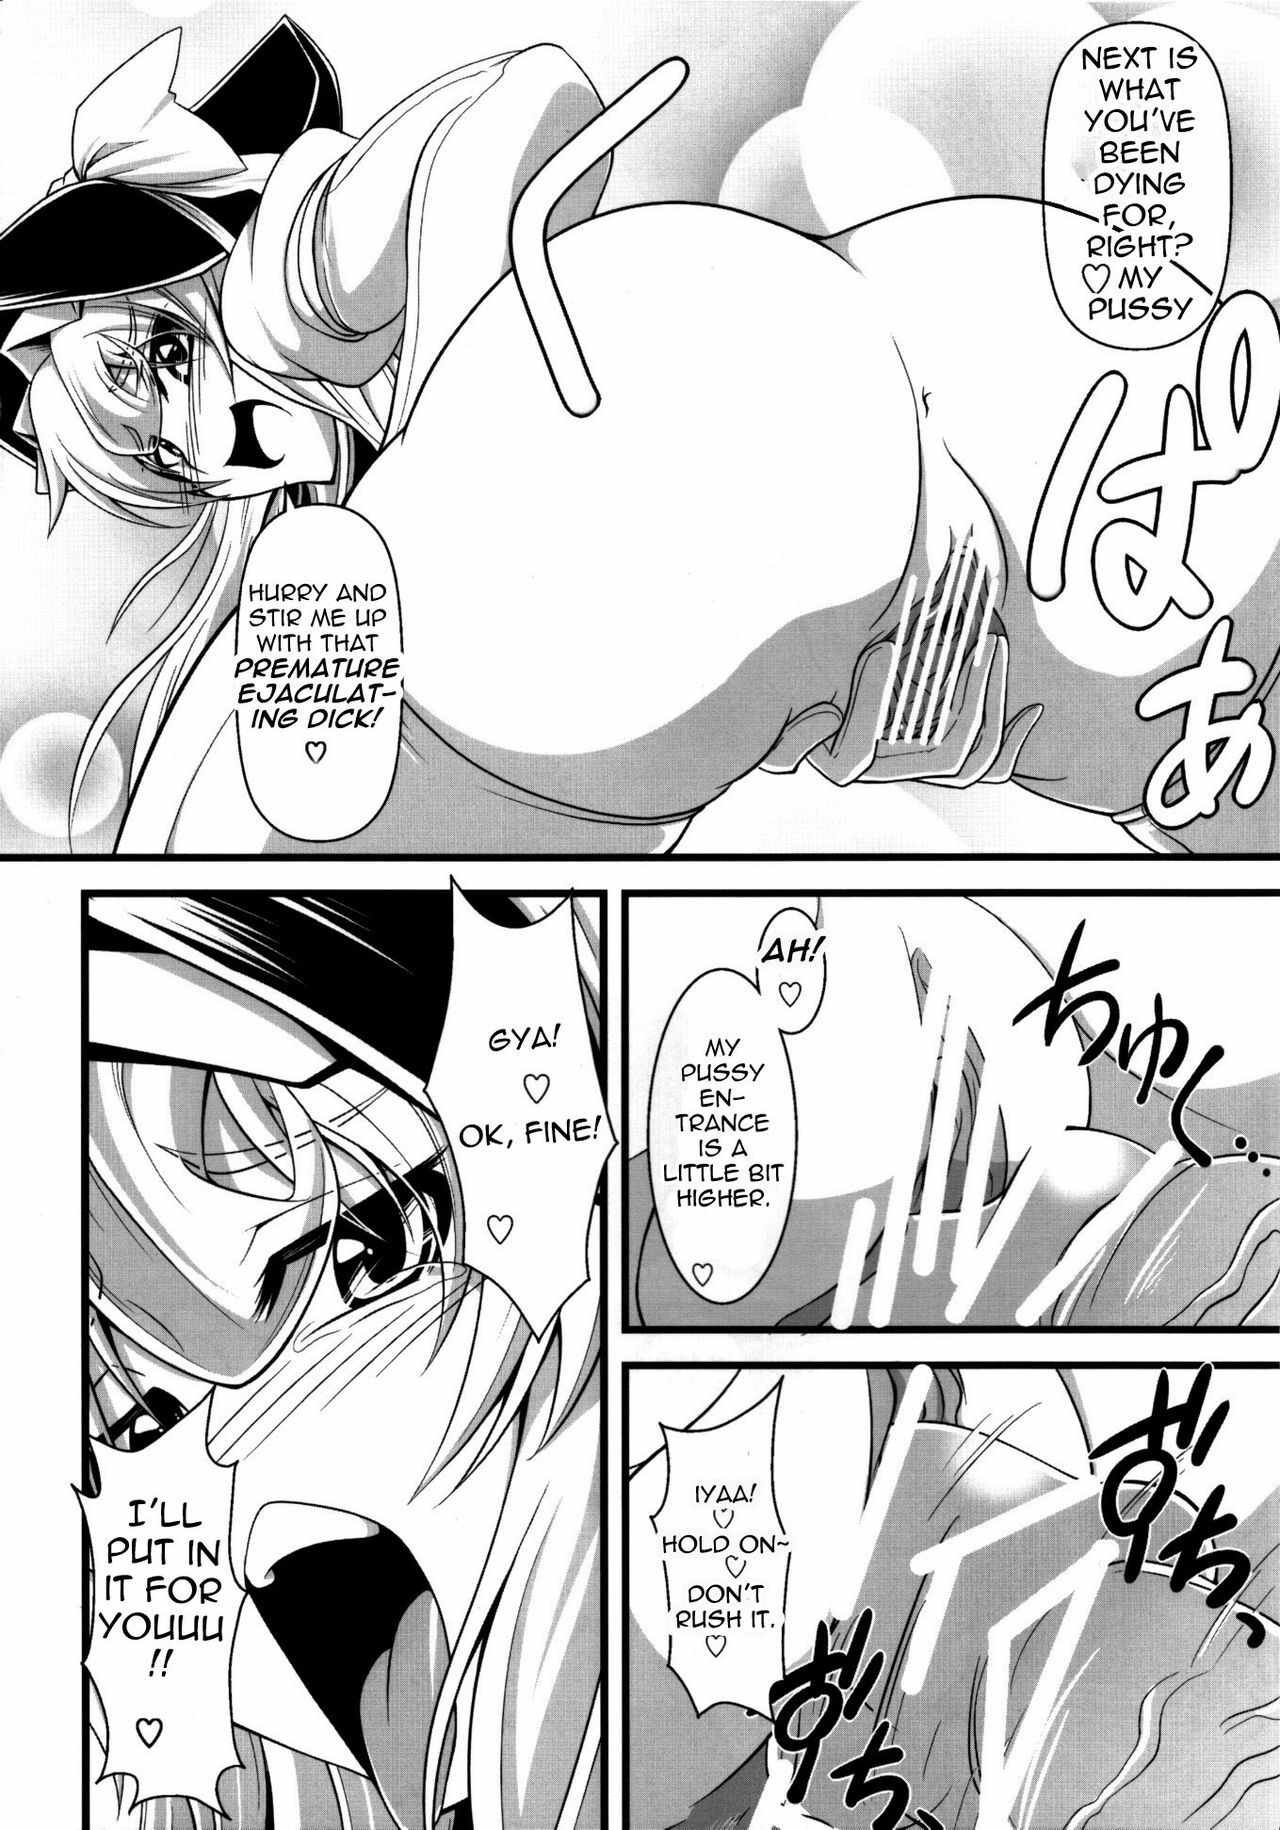 (Kouroumu 6) [Forever and ever... (Eisen)] GLAMOROUS MARISA (Touhou Project) [English] =Pineapples r Us= page 12 full